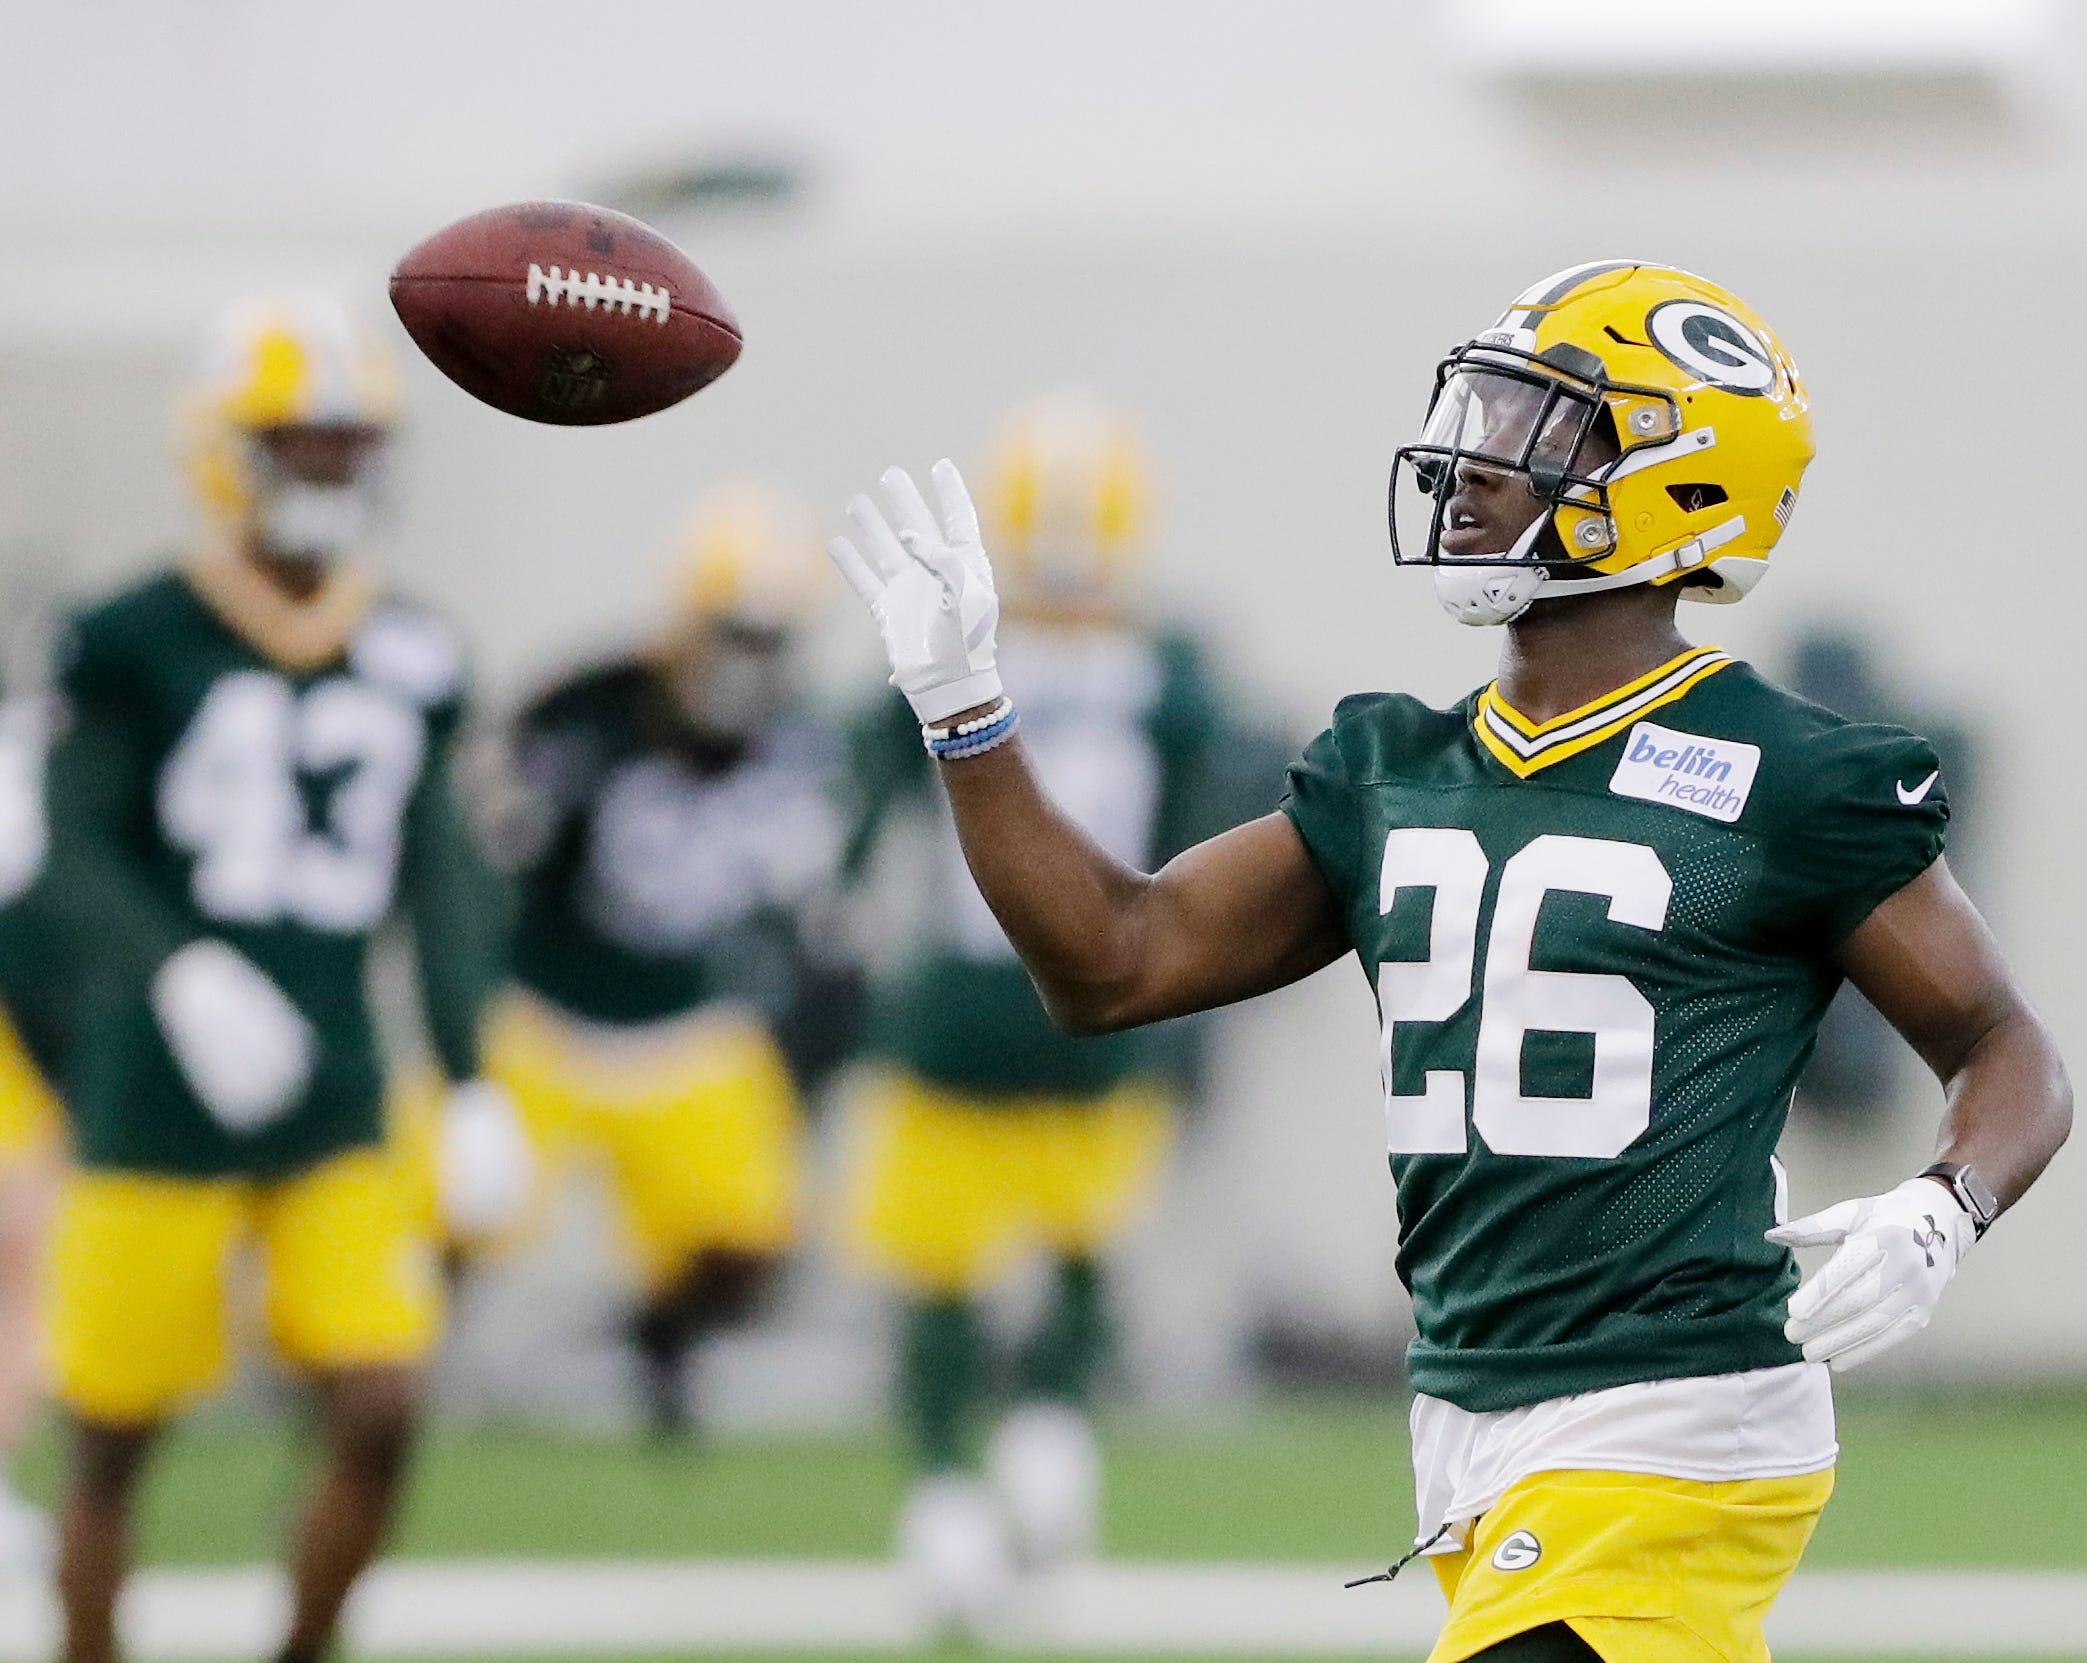 Green Bay Packers safety Darnell Savage (26) during practice at rookie minicamp at the Don Hutson Center on Friday, May 3, 2019 in Ashwaubenon, Wis.
Adam Wesley/USA TODAY NETWORK-Wis